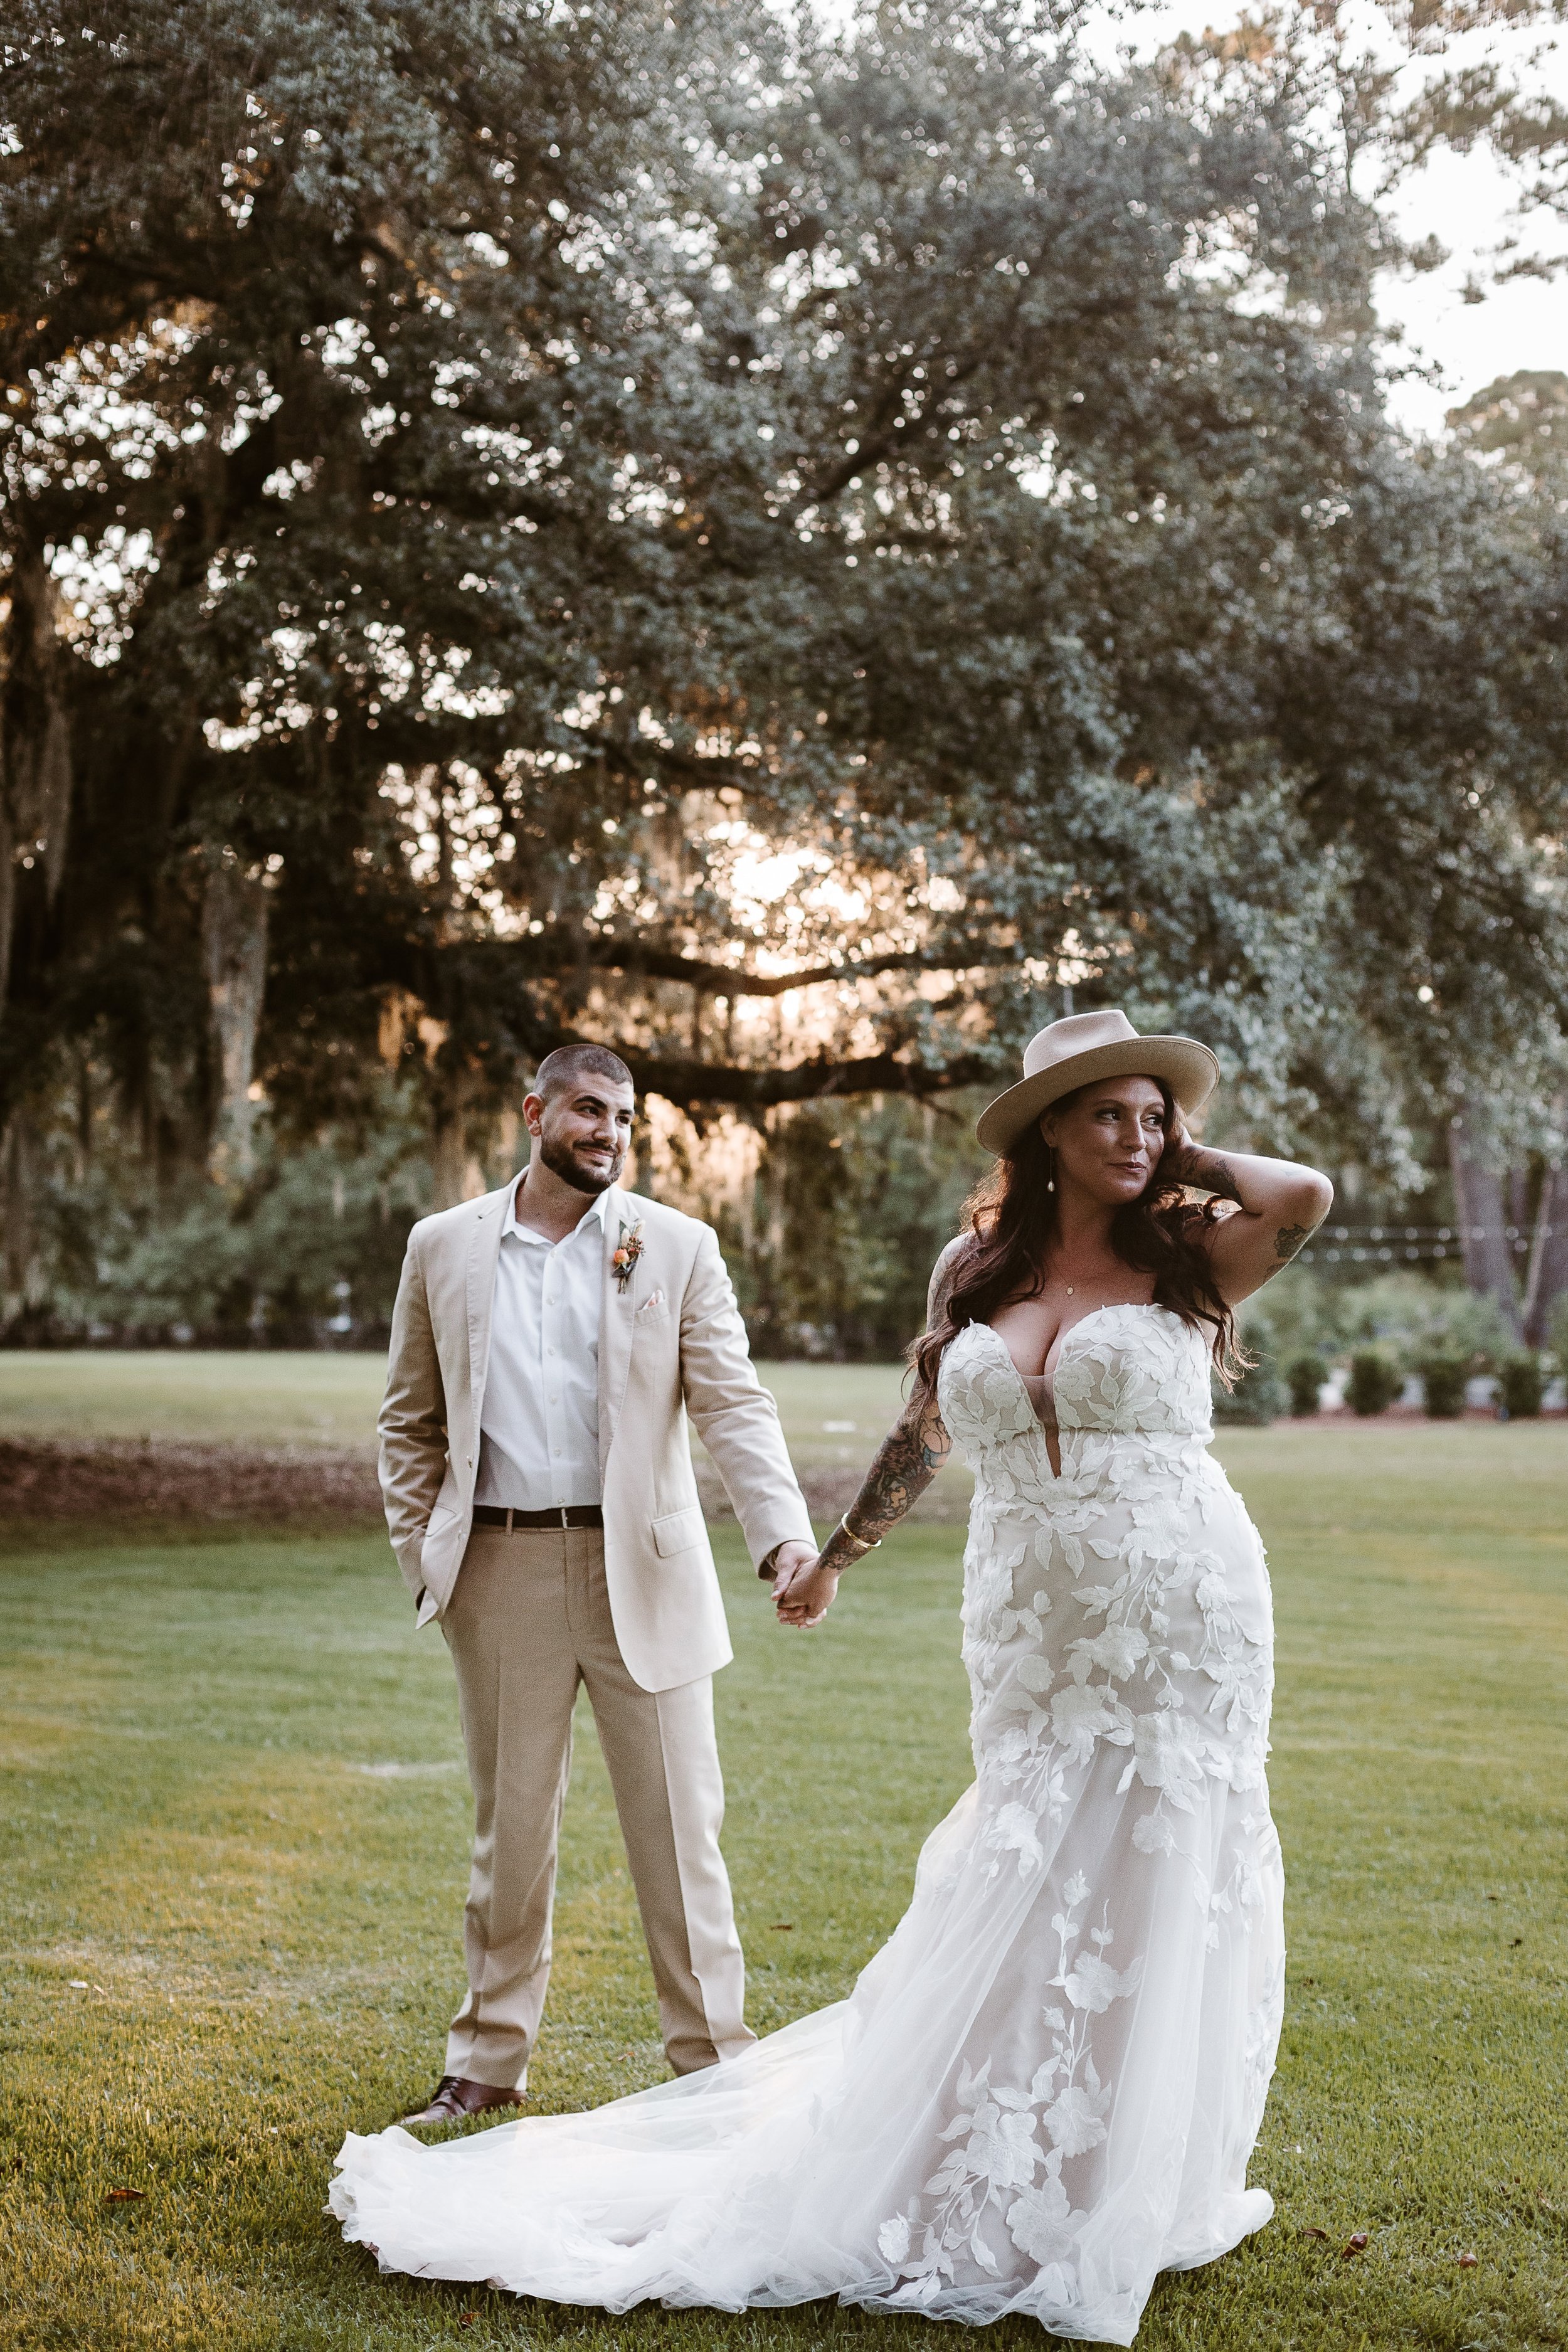 ivory-and-beau-blog-down-for-the-gown-real-bride-rebecca-ingram-wedding-dress-maggie-sottero-bridal-gown-strapless-wedding-dress-wedding-gown-savannah-bridal-shop-savannah-bridal-boutique-savannah-georgia-Annie & Cam Wedding-703.jpg